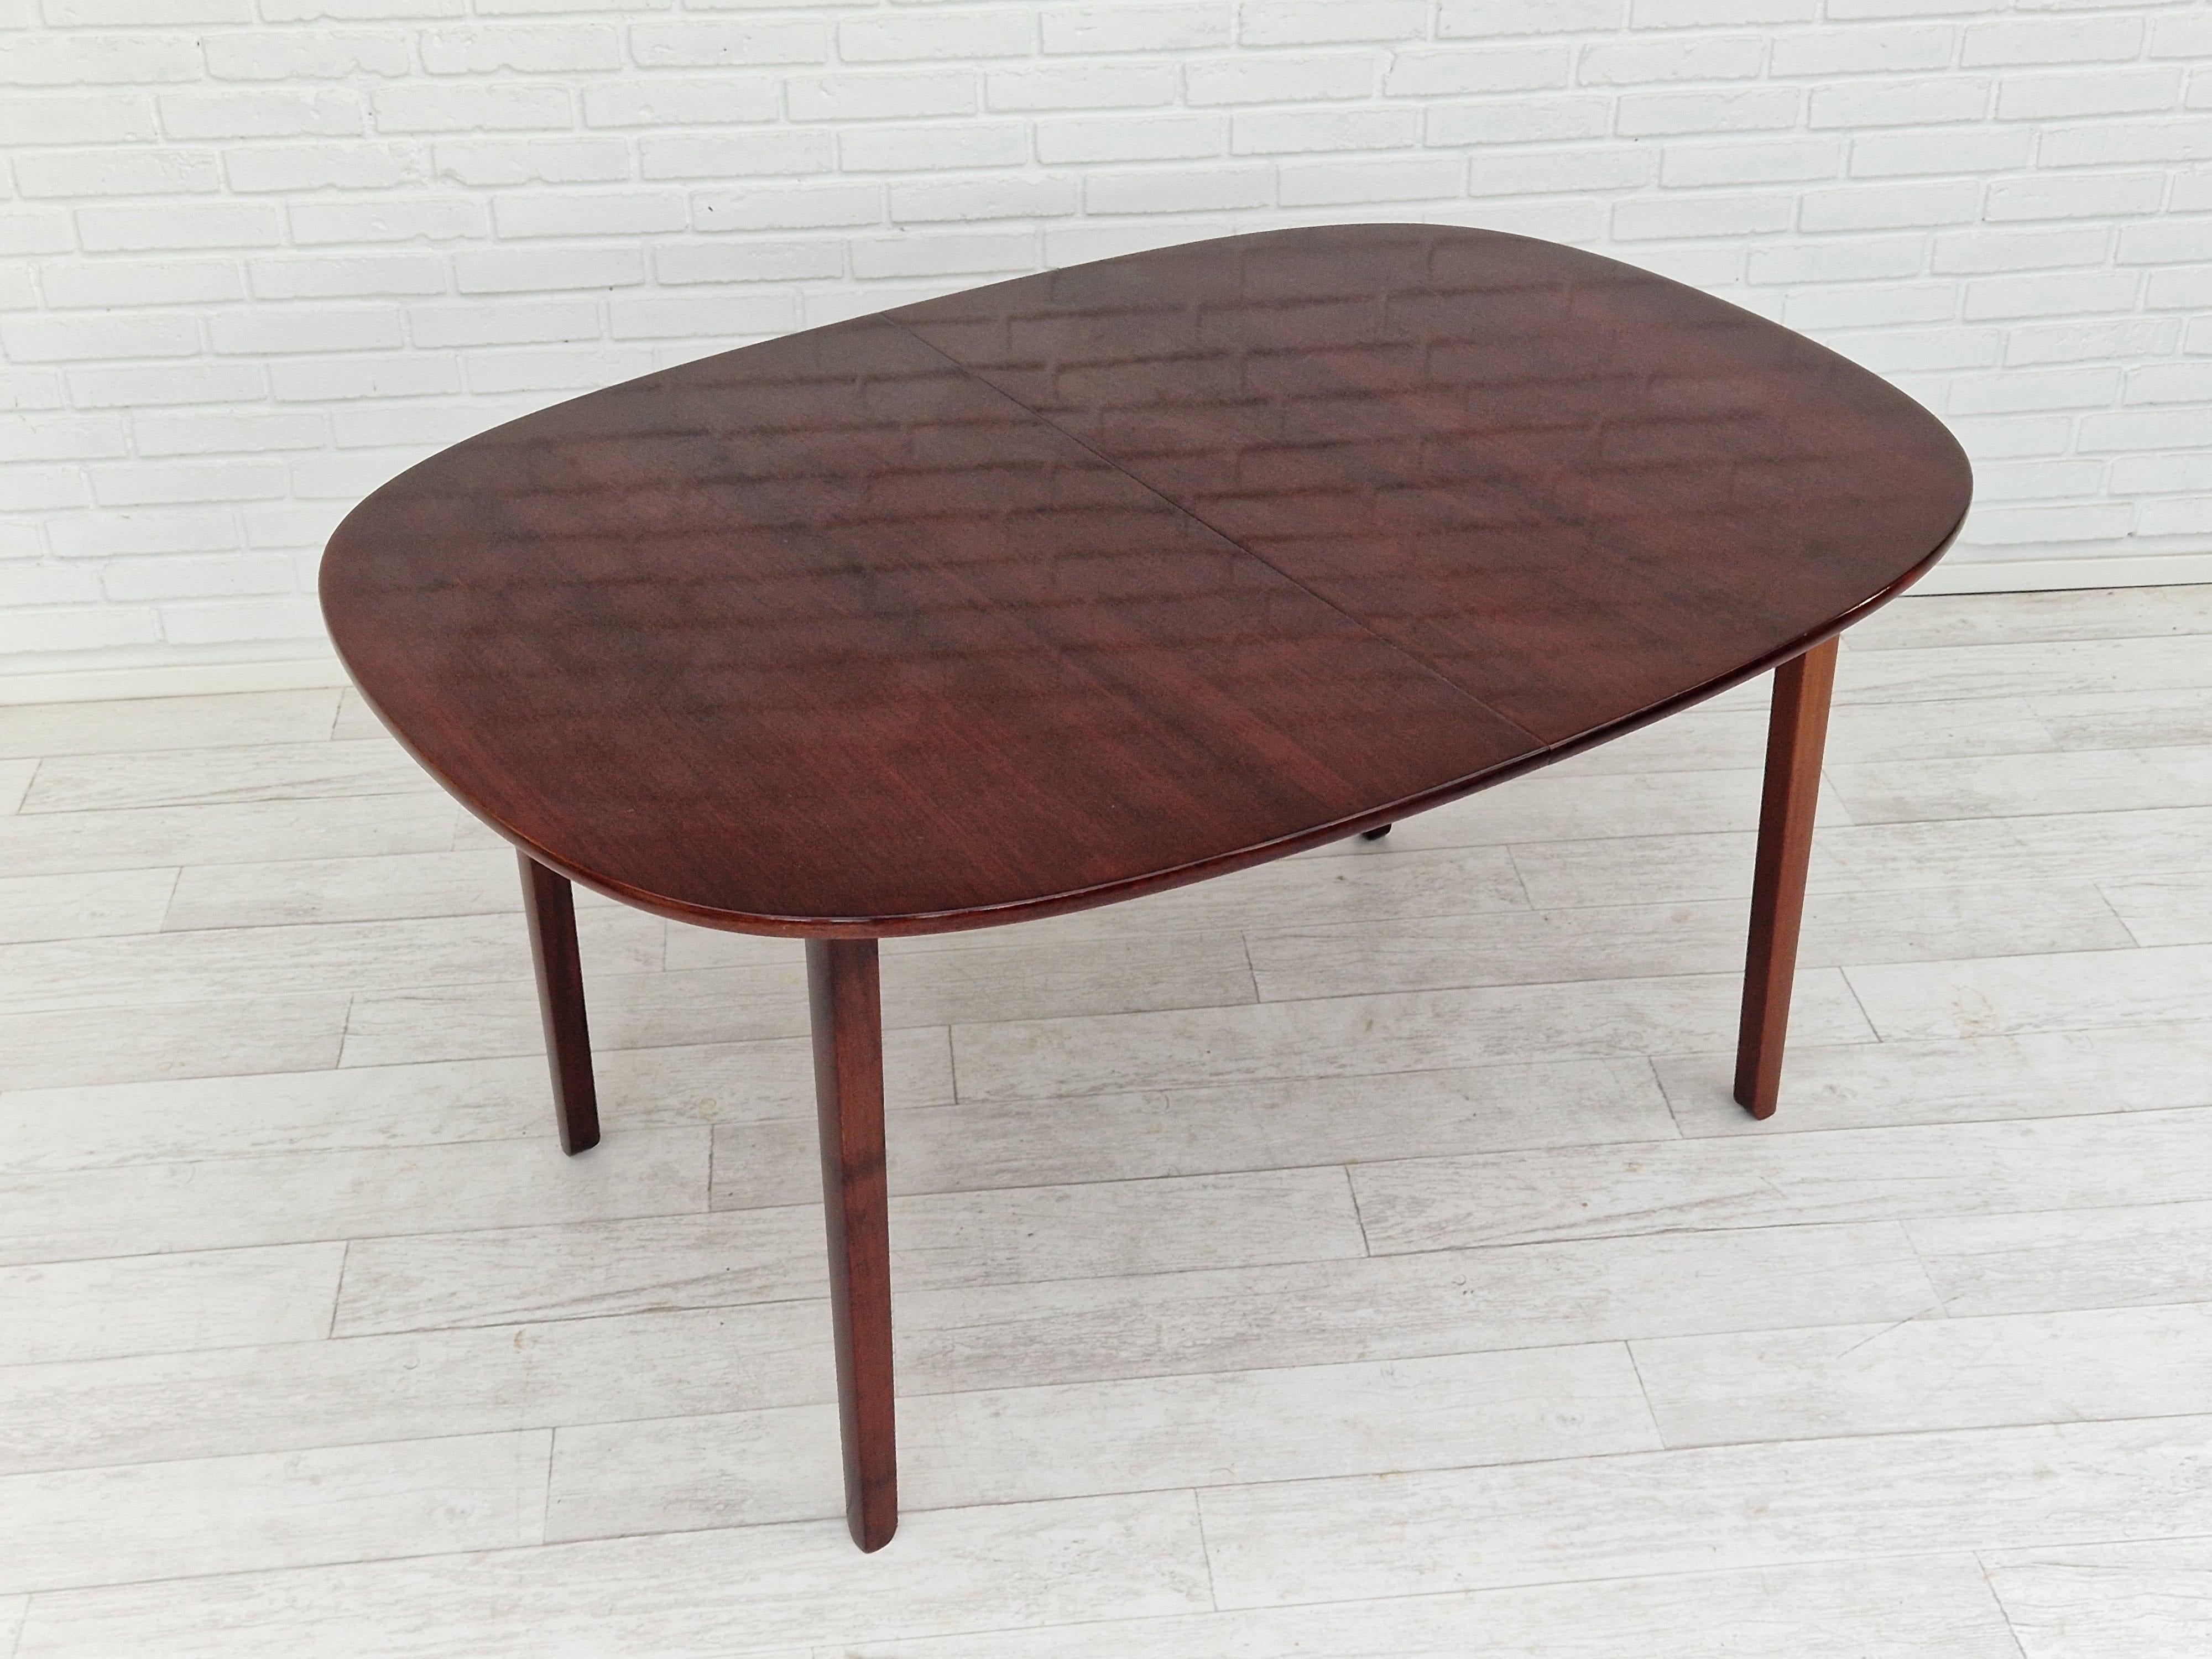 Lacquered 70s, Danish design by Ole Wanscher, dining table.